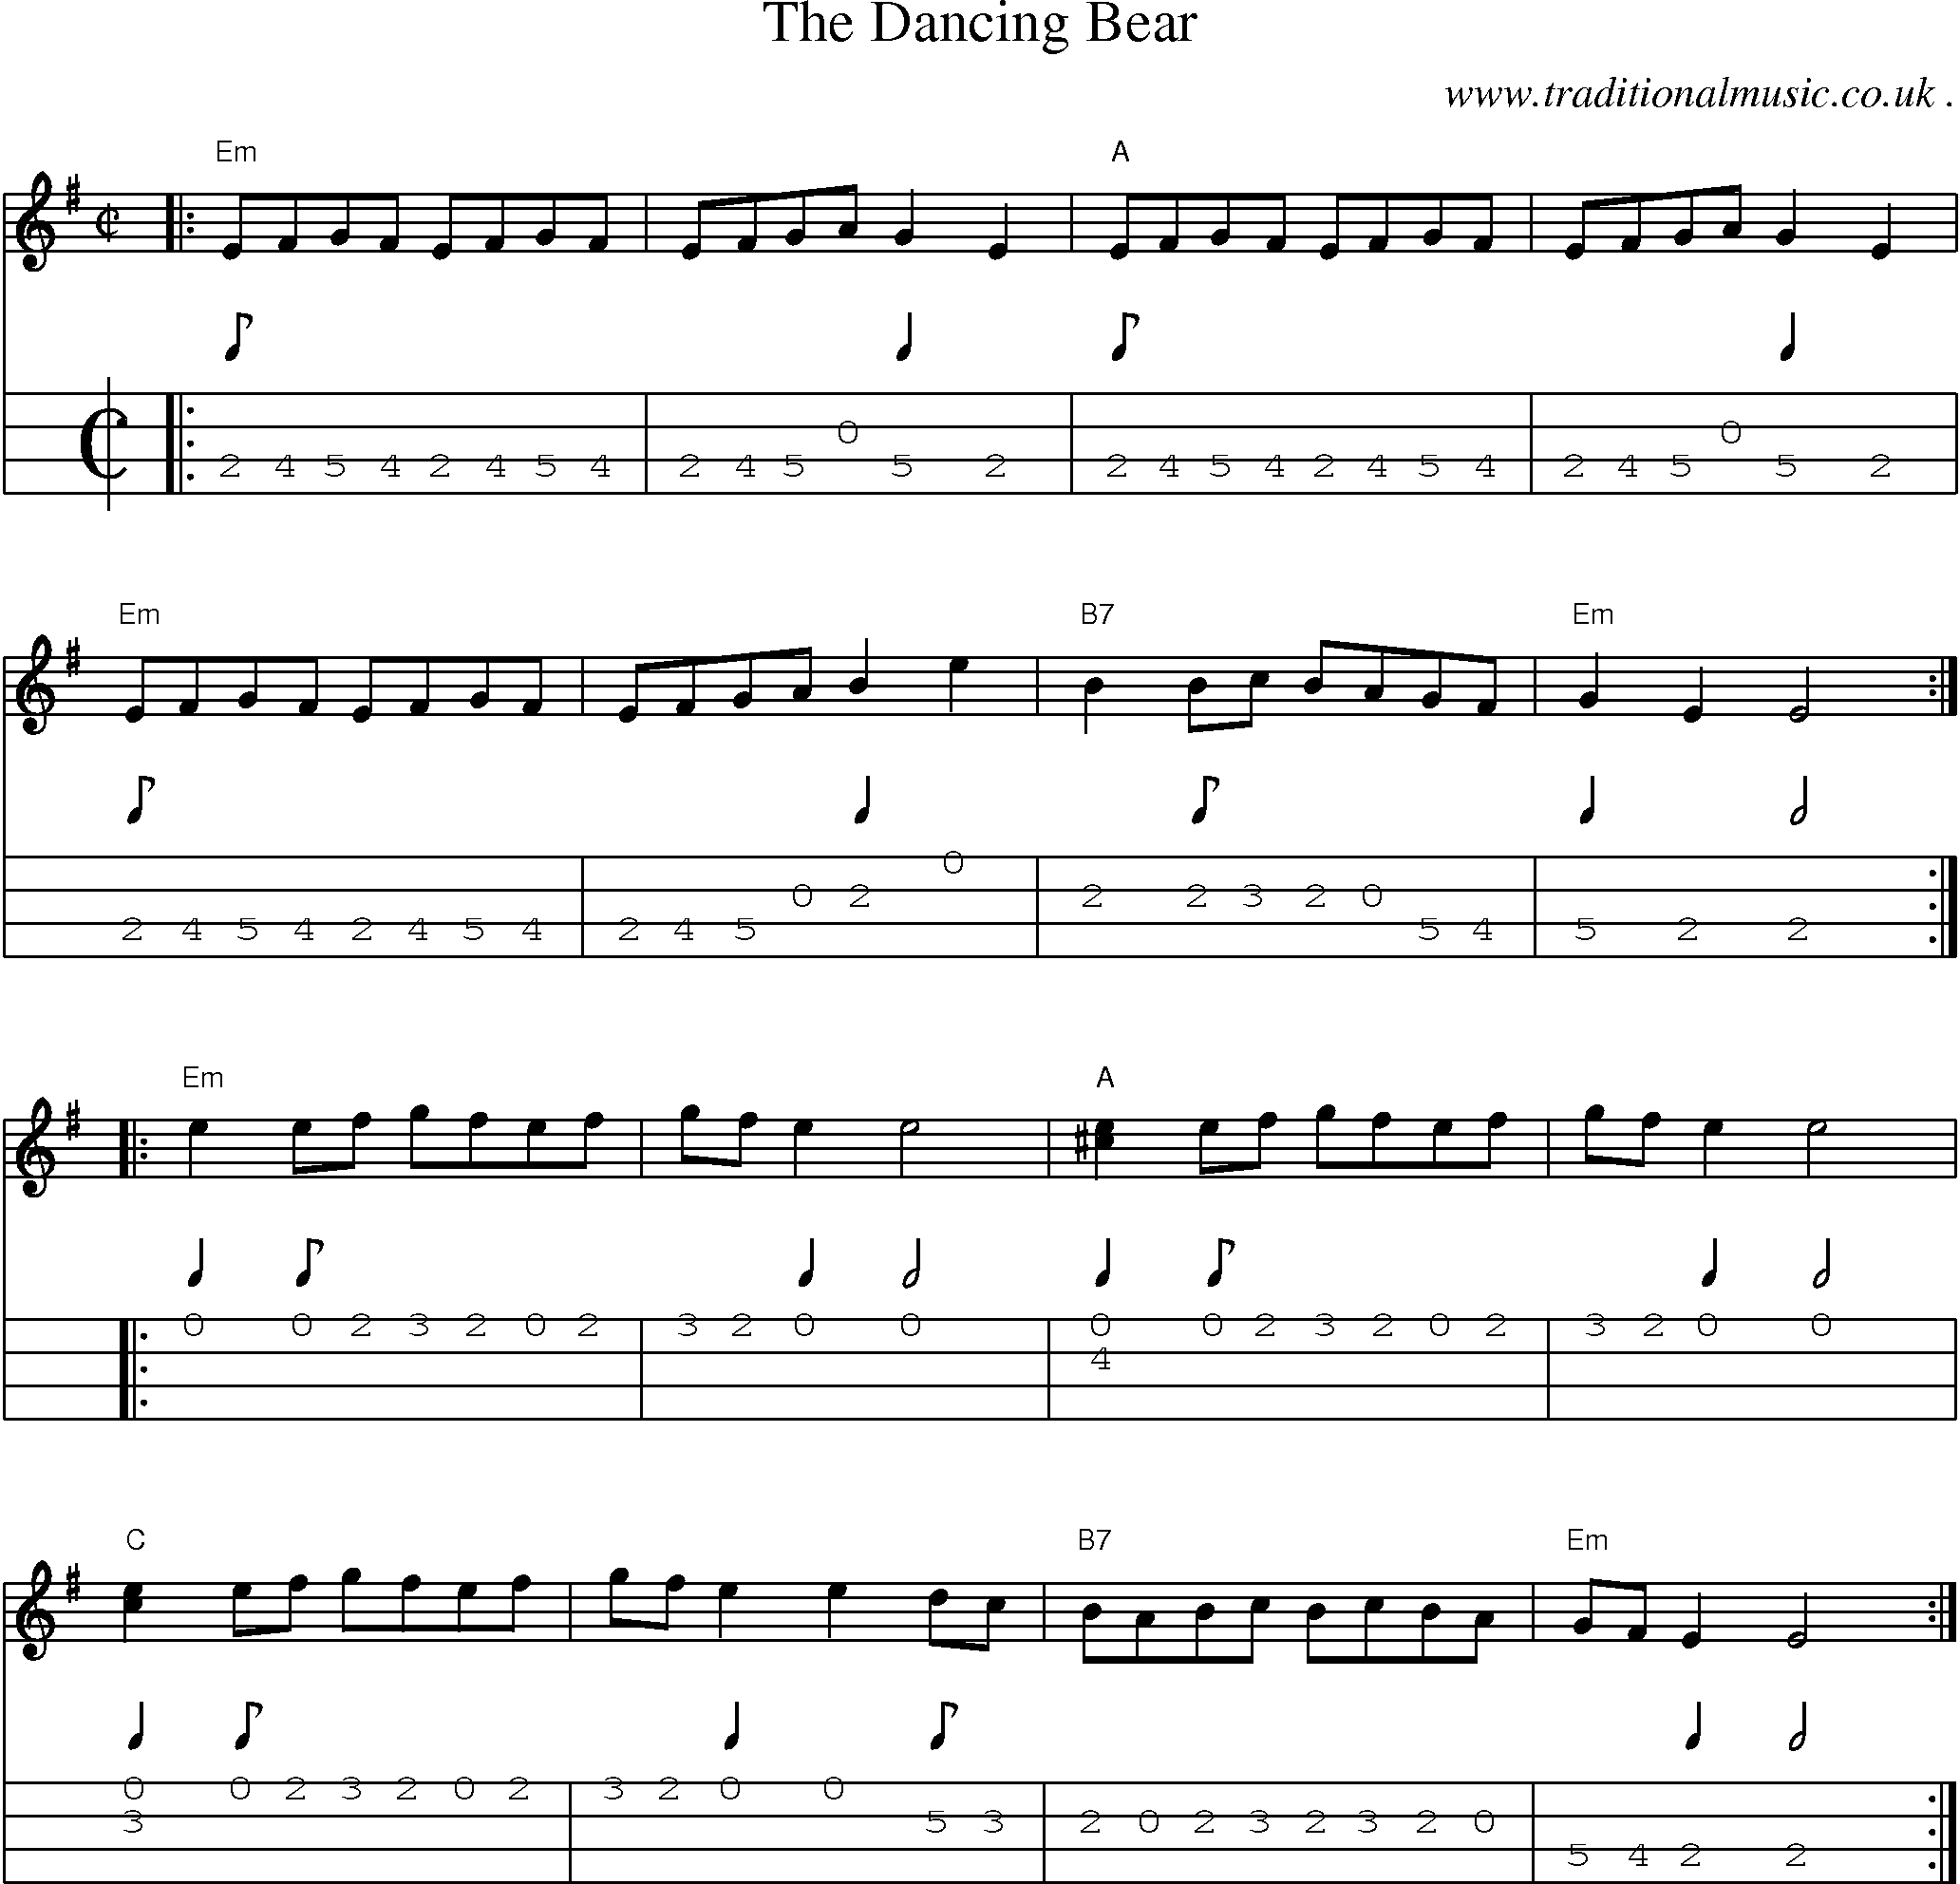 Music Score and Guitar Tabs for The Dancing Bear